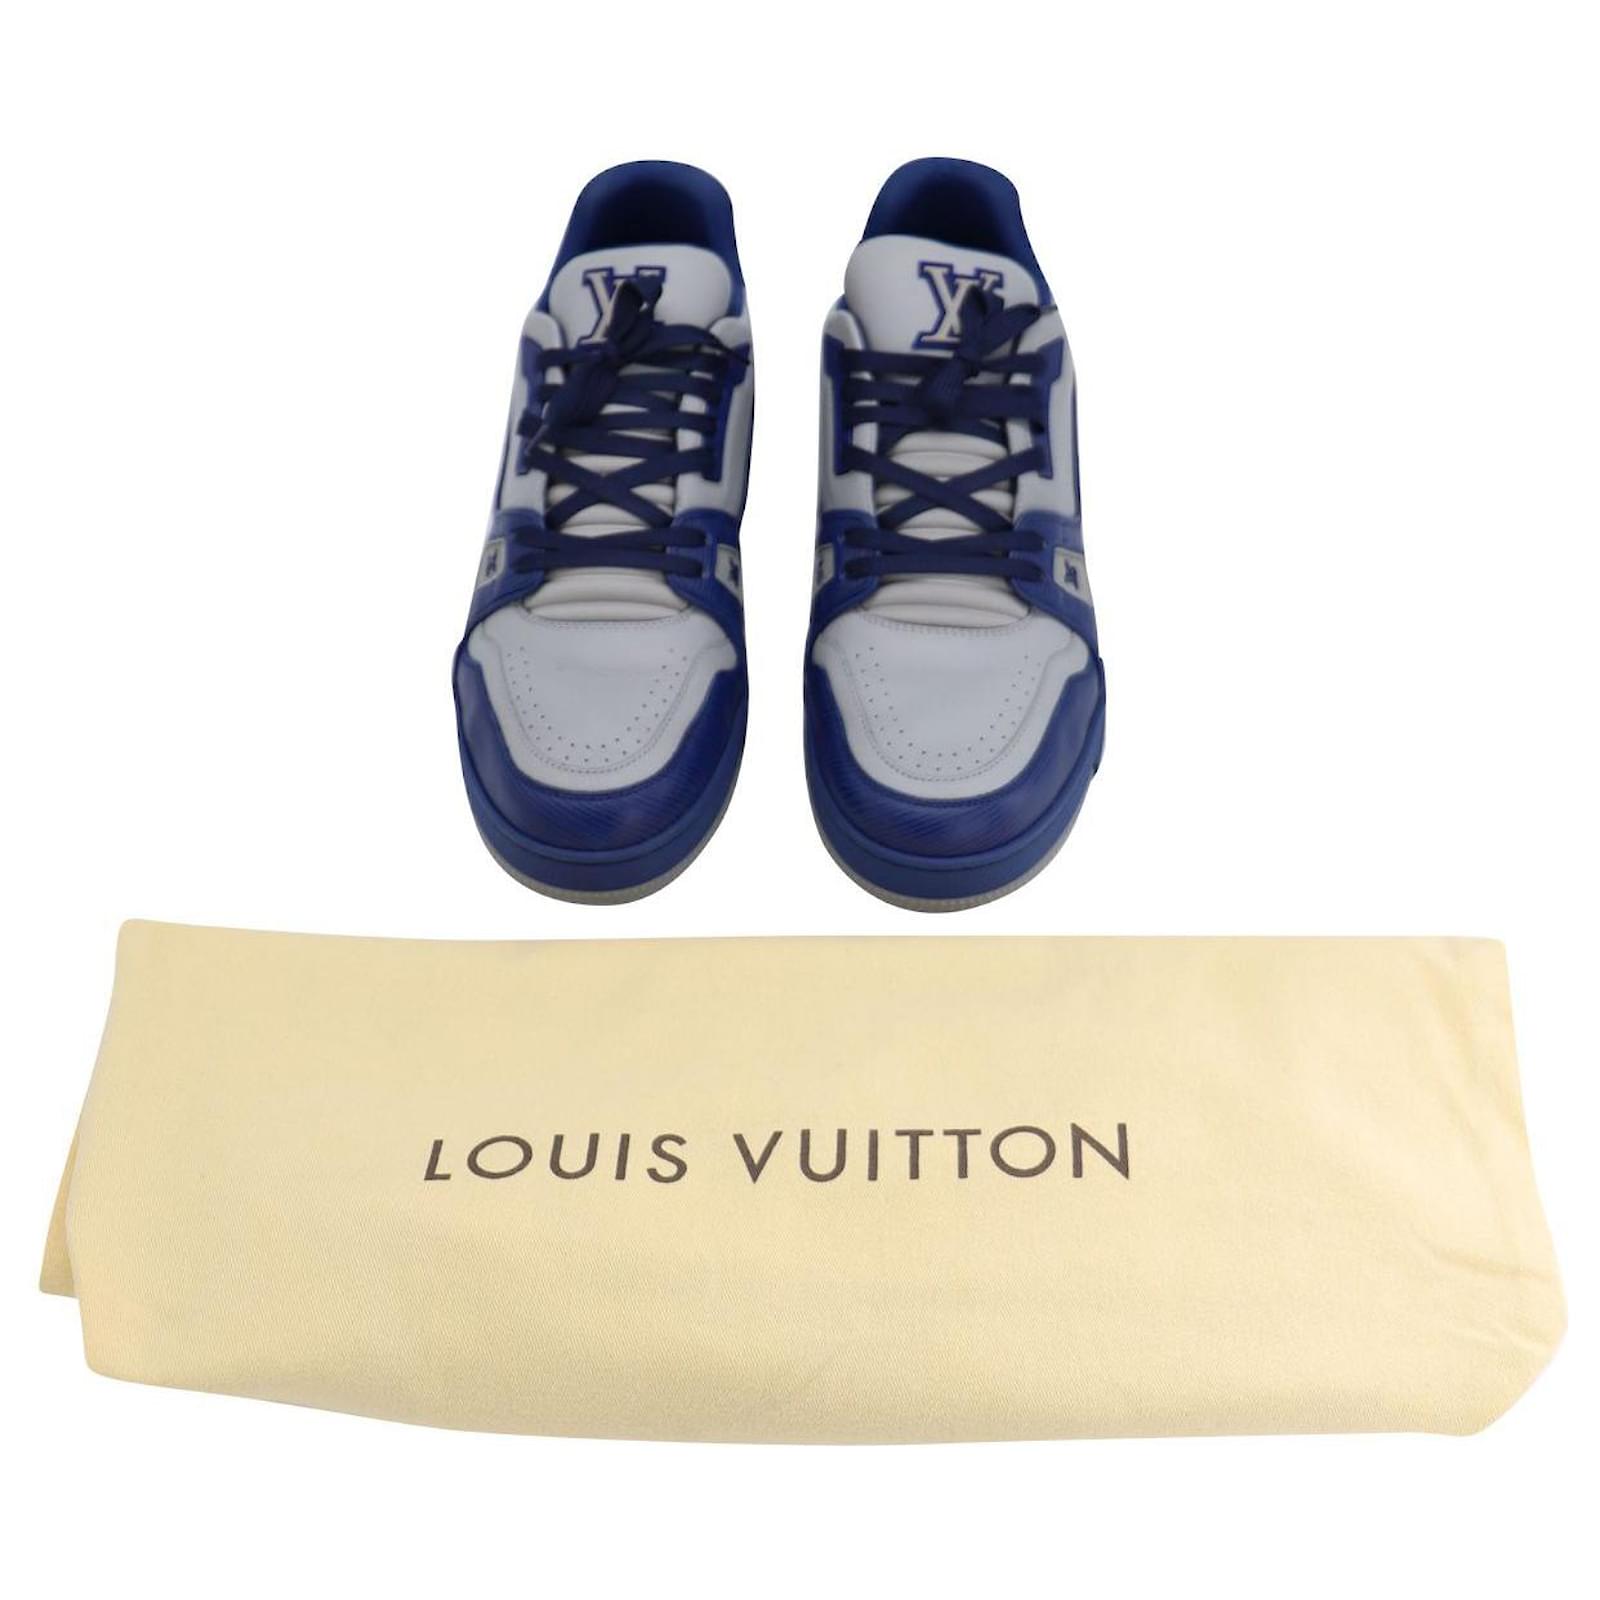 Louis Vuitton Trainer Sneakers in Blue Marine Leather - US10 Navy